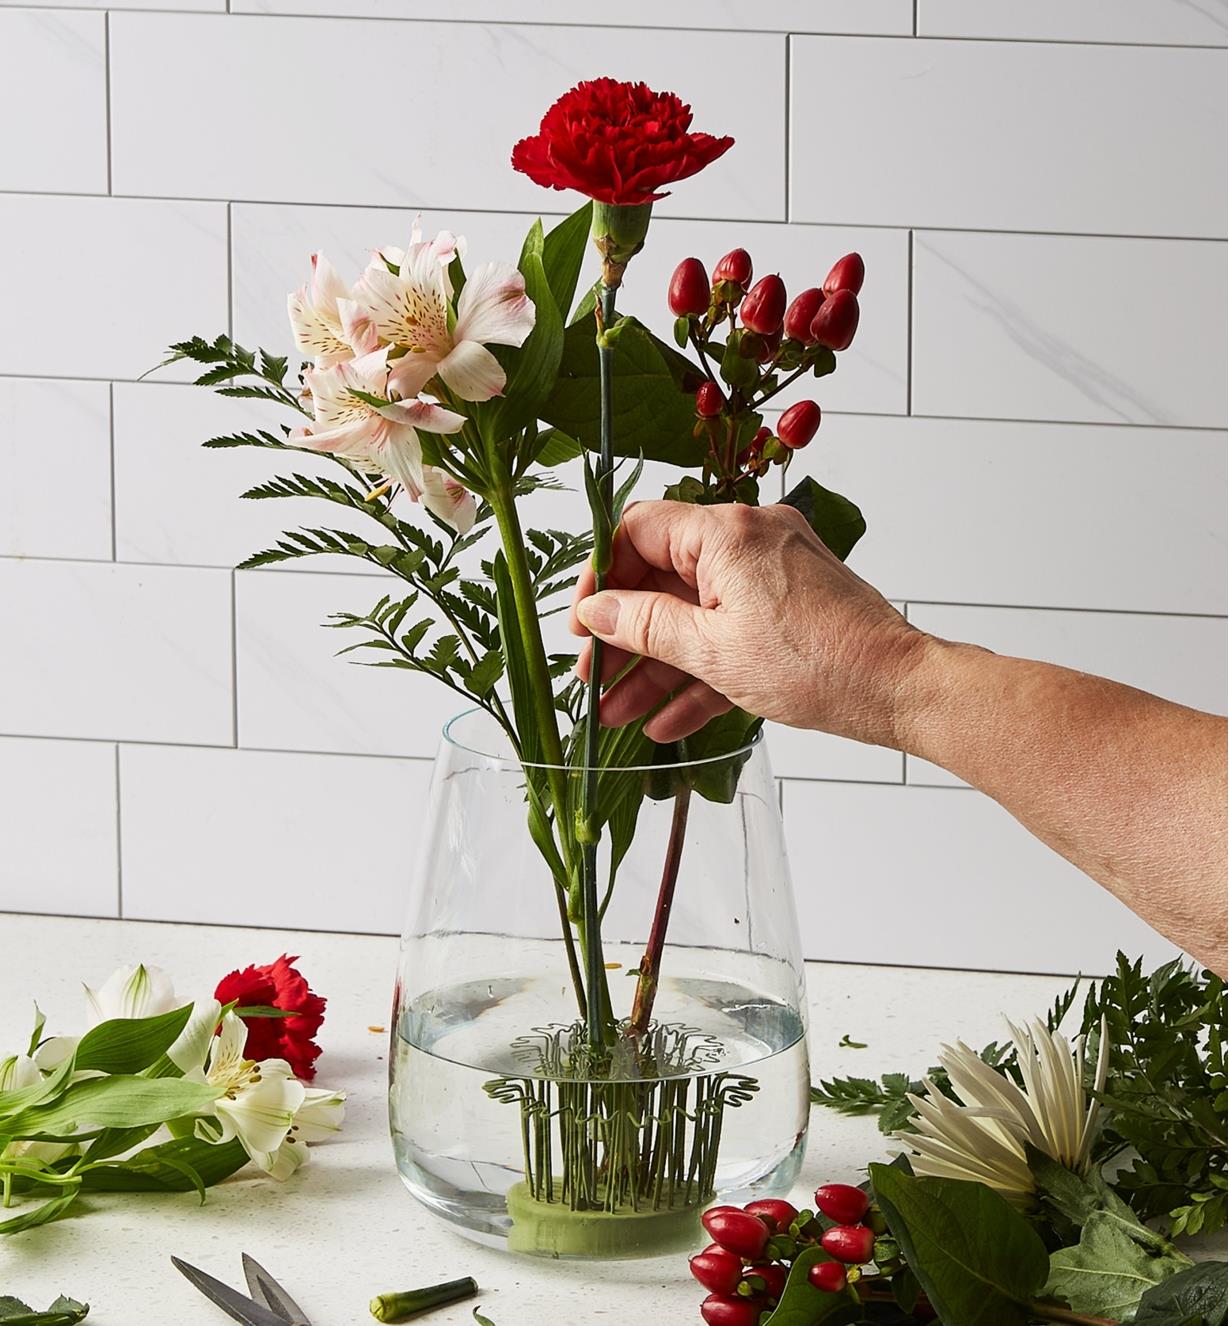 Arranging flowers in a Blue Ribbon flower holder in the bottom of a glass vase